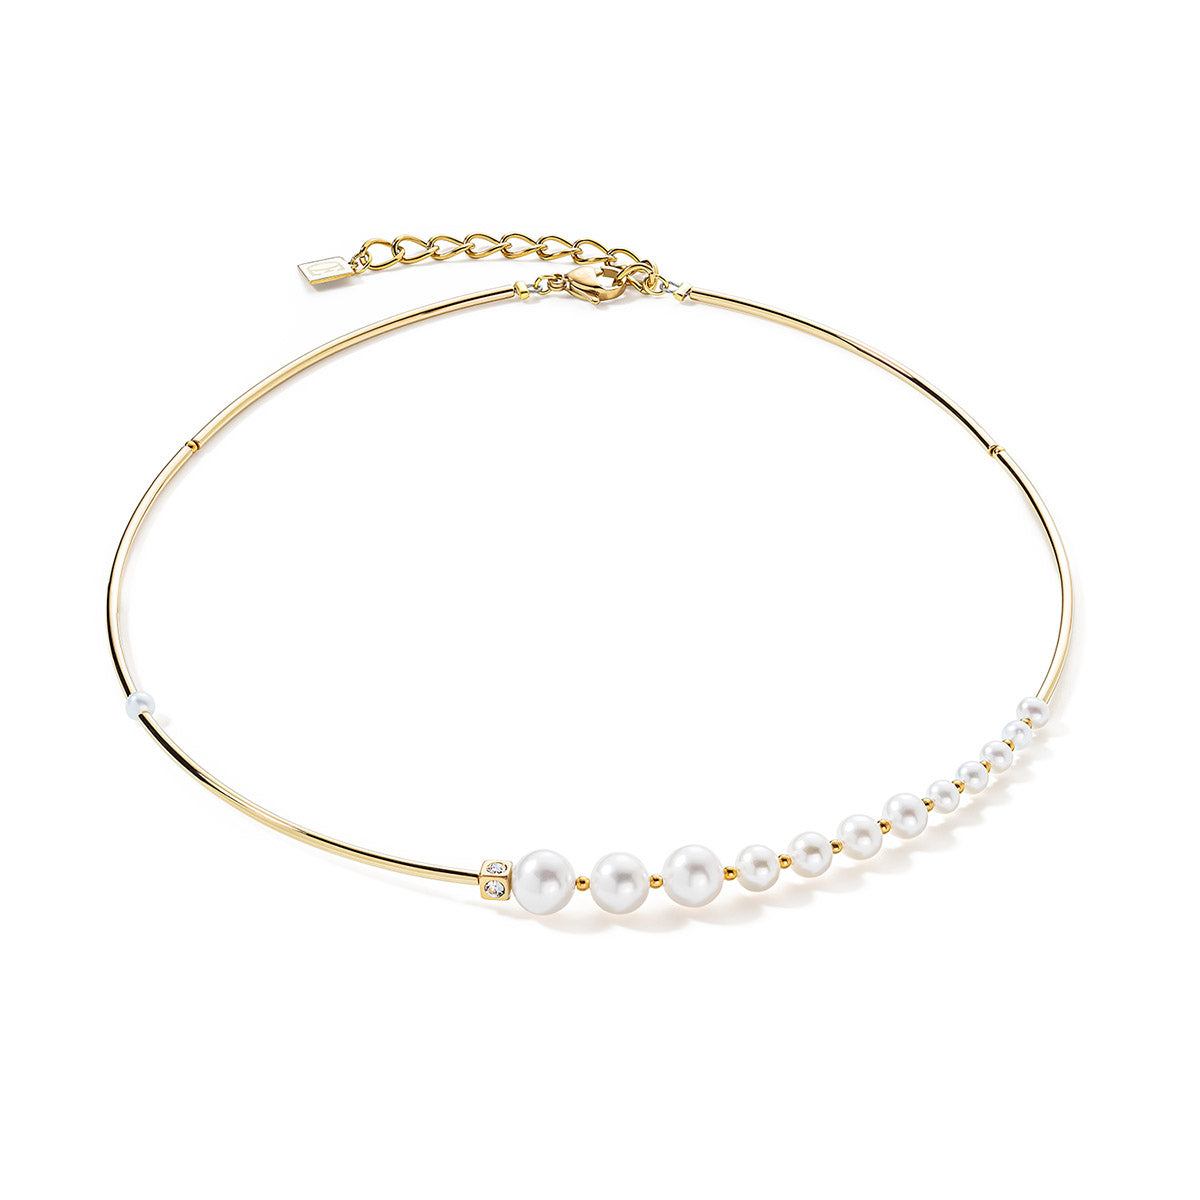 Freshwater Pearls on Gold Strand Necklace 1102/10_1416